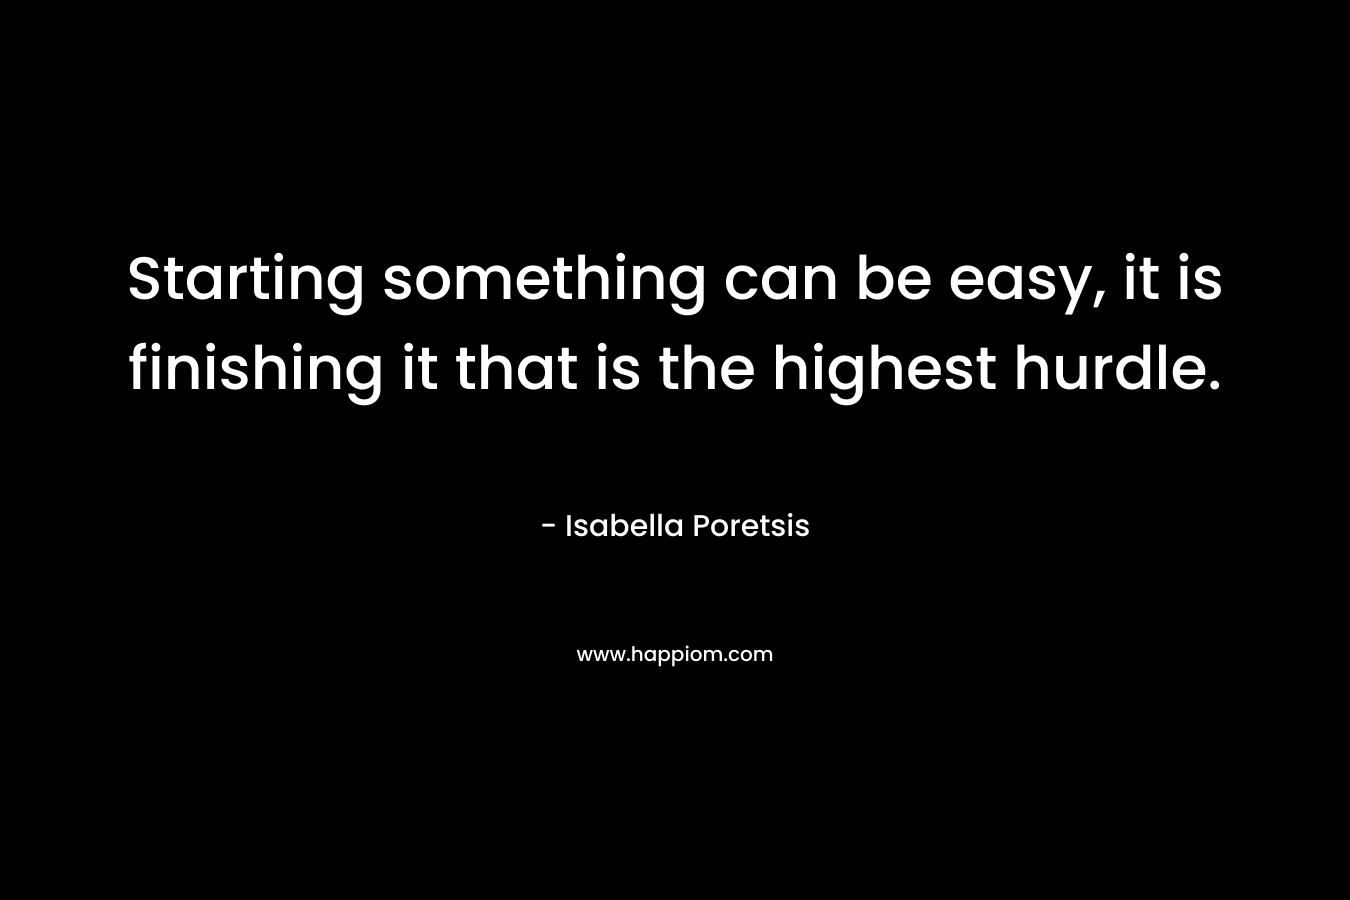 Starting something can be easy, it is finishing it that is the highest hurdle. – Isabella Poretsis